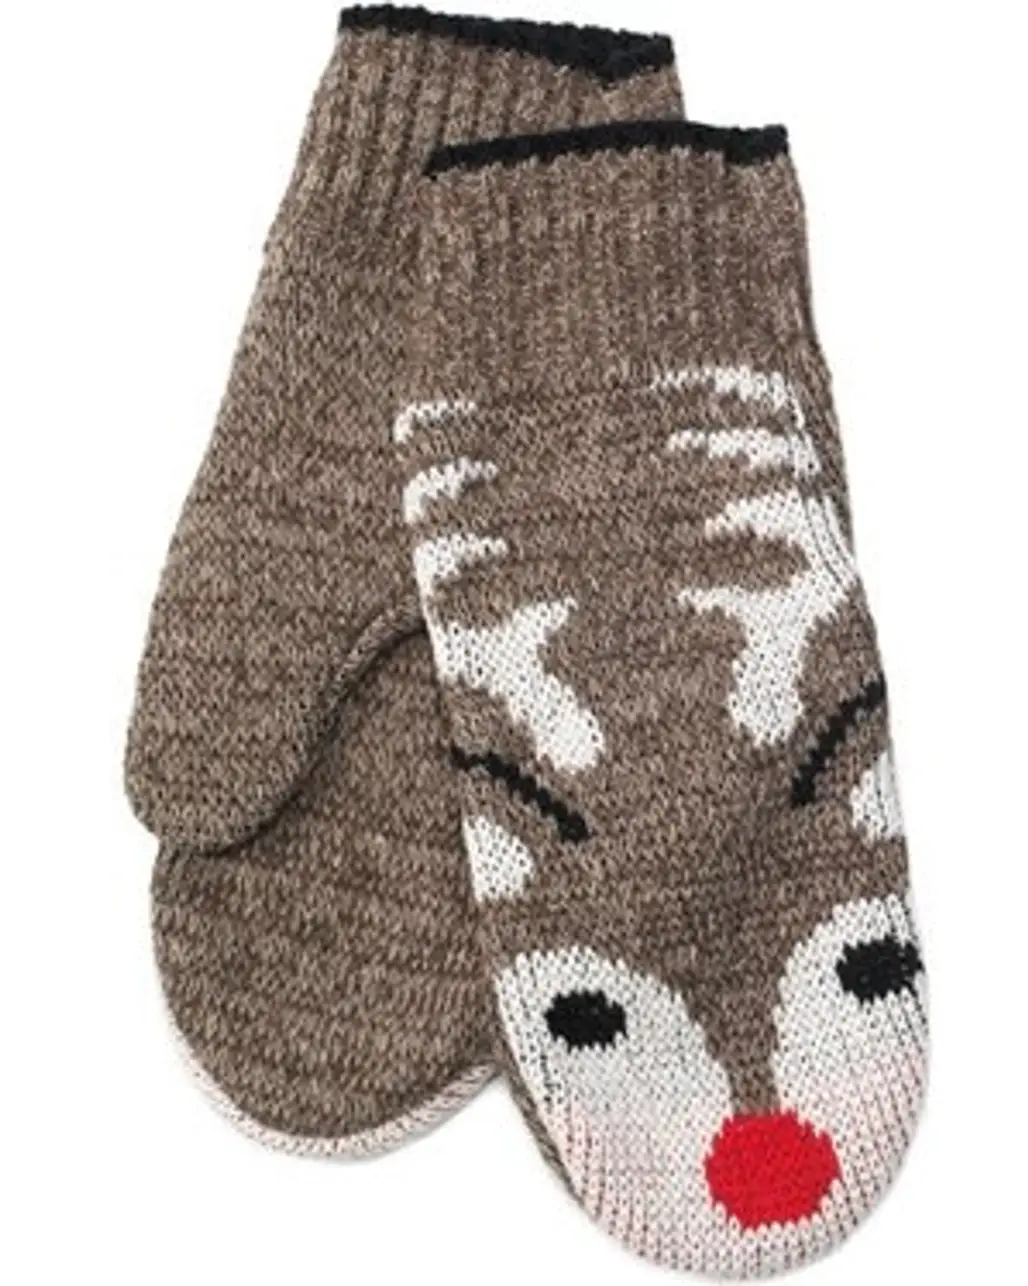 Rudolph the Red-Nosed Reindeer Mittens